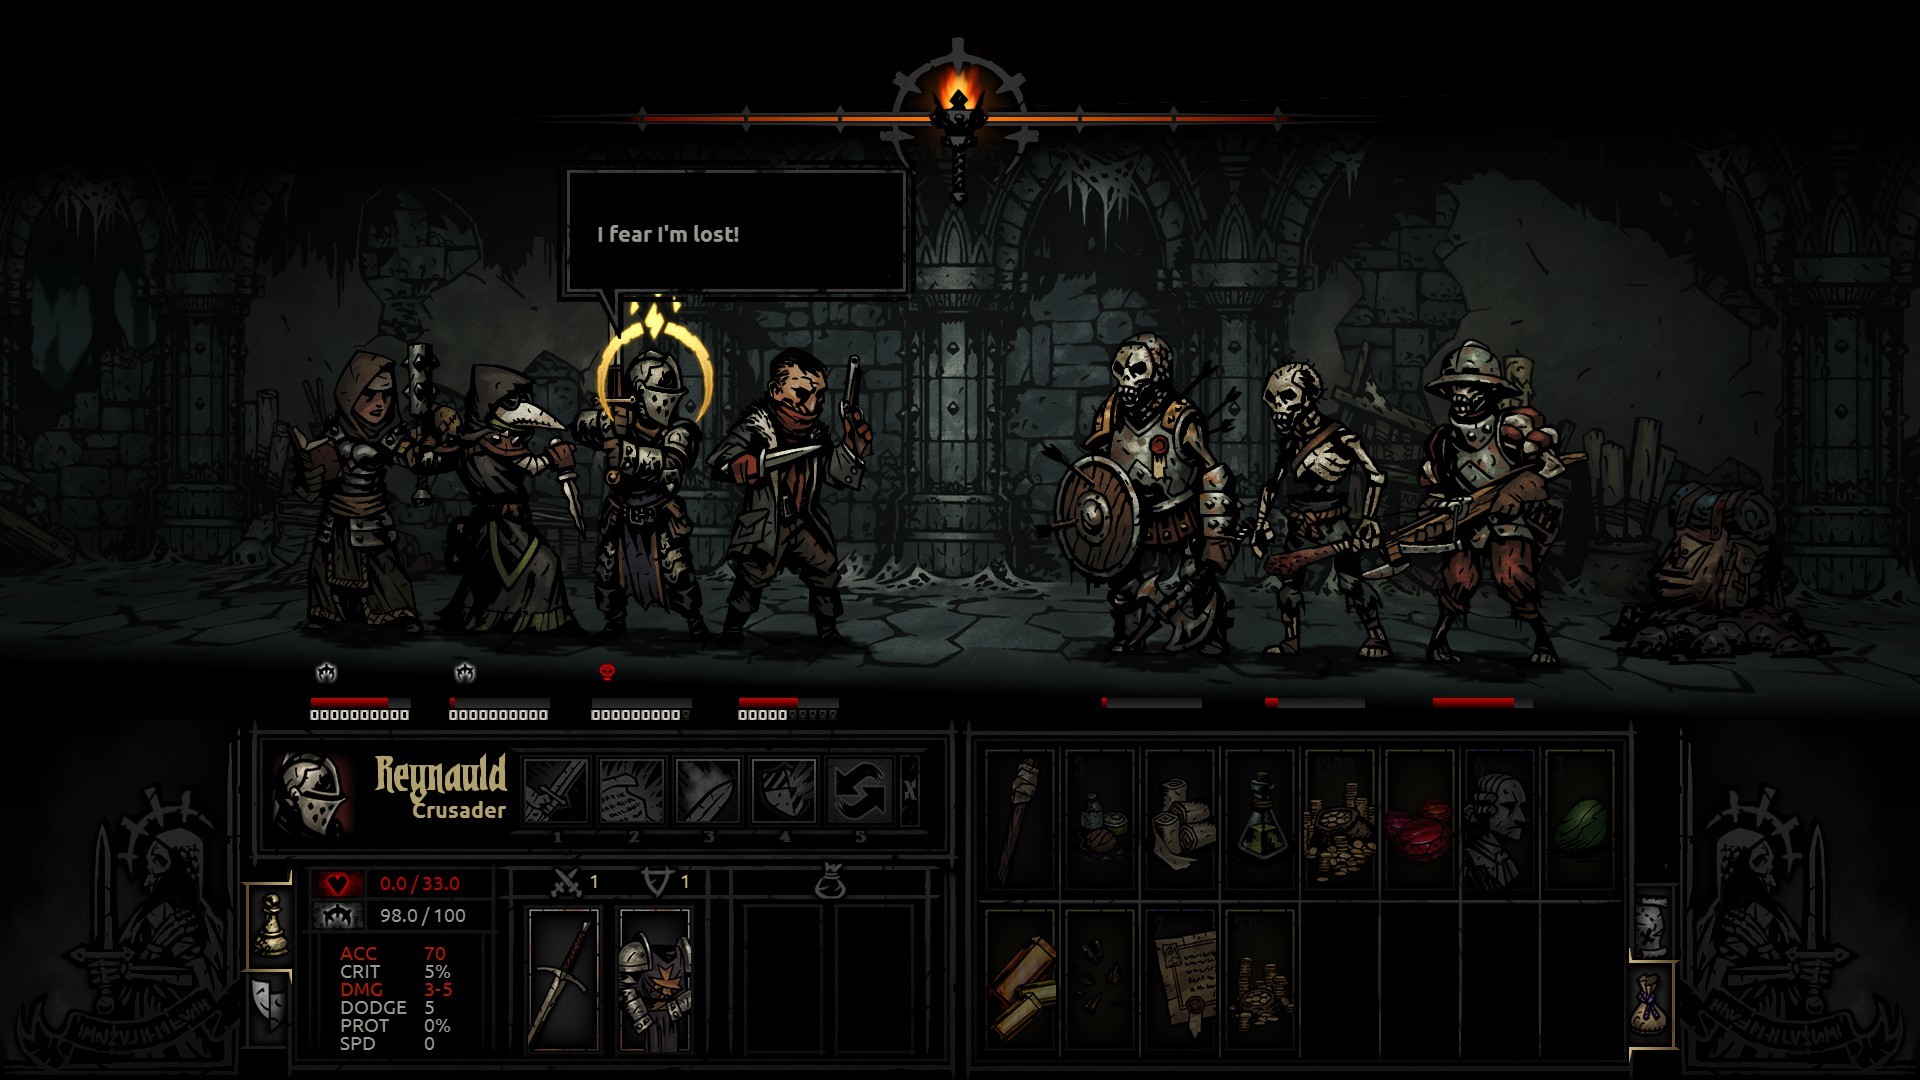 My first dungeon. Shortly after, my Plague Doctor died. Clearly Im off to a good start